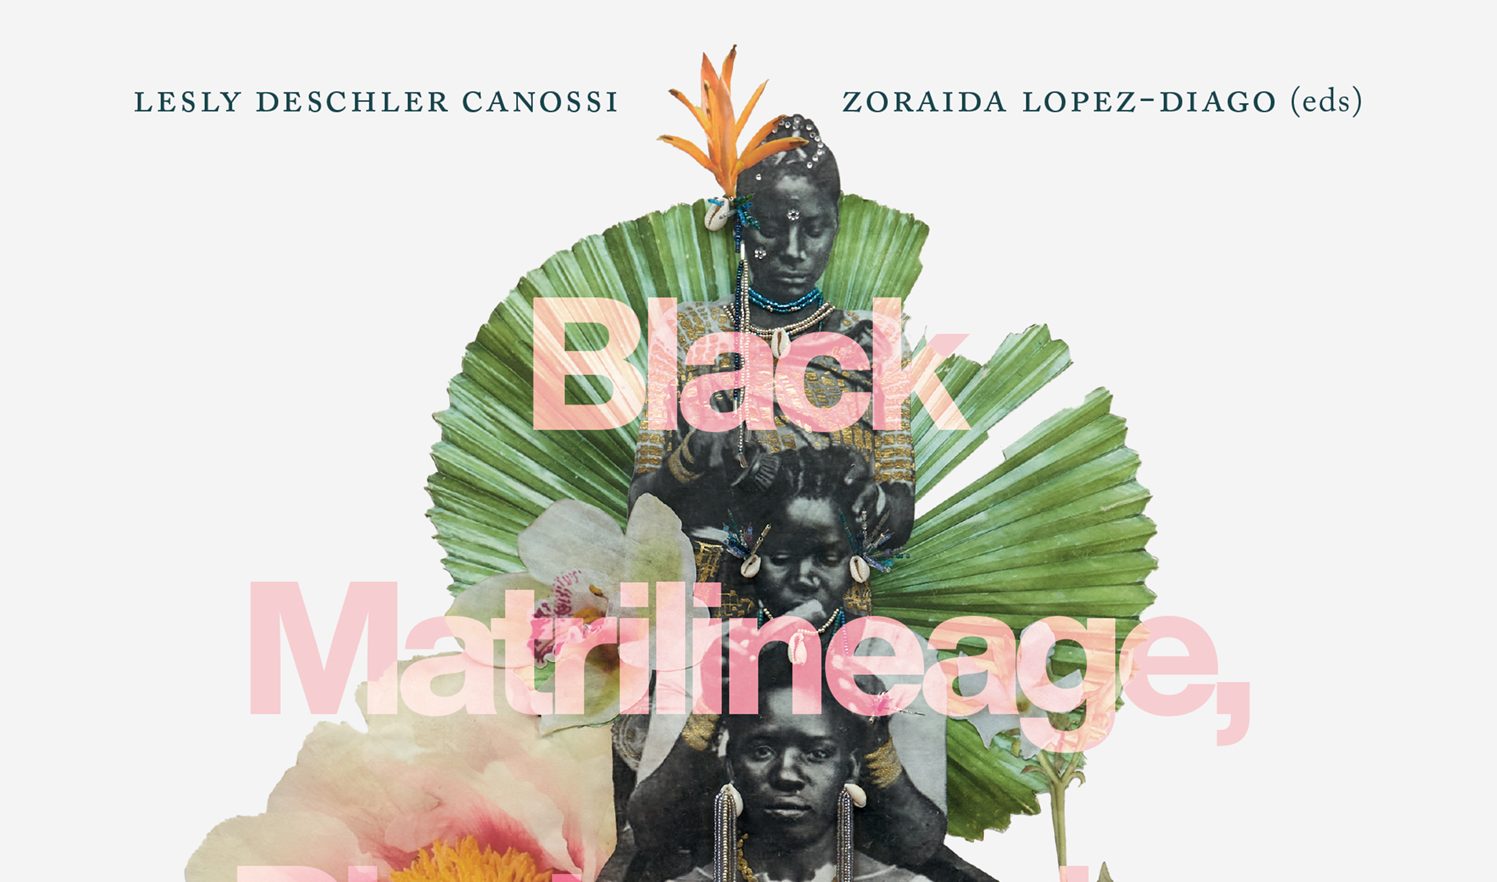 Black Matrilineage, Photography, and Representation: Another Way of Knowing, edited by Lesly Deschler Canossi and Zoraida Lopez-Diago, Leuven University Press, 2022 (cover image)